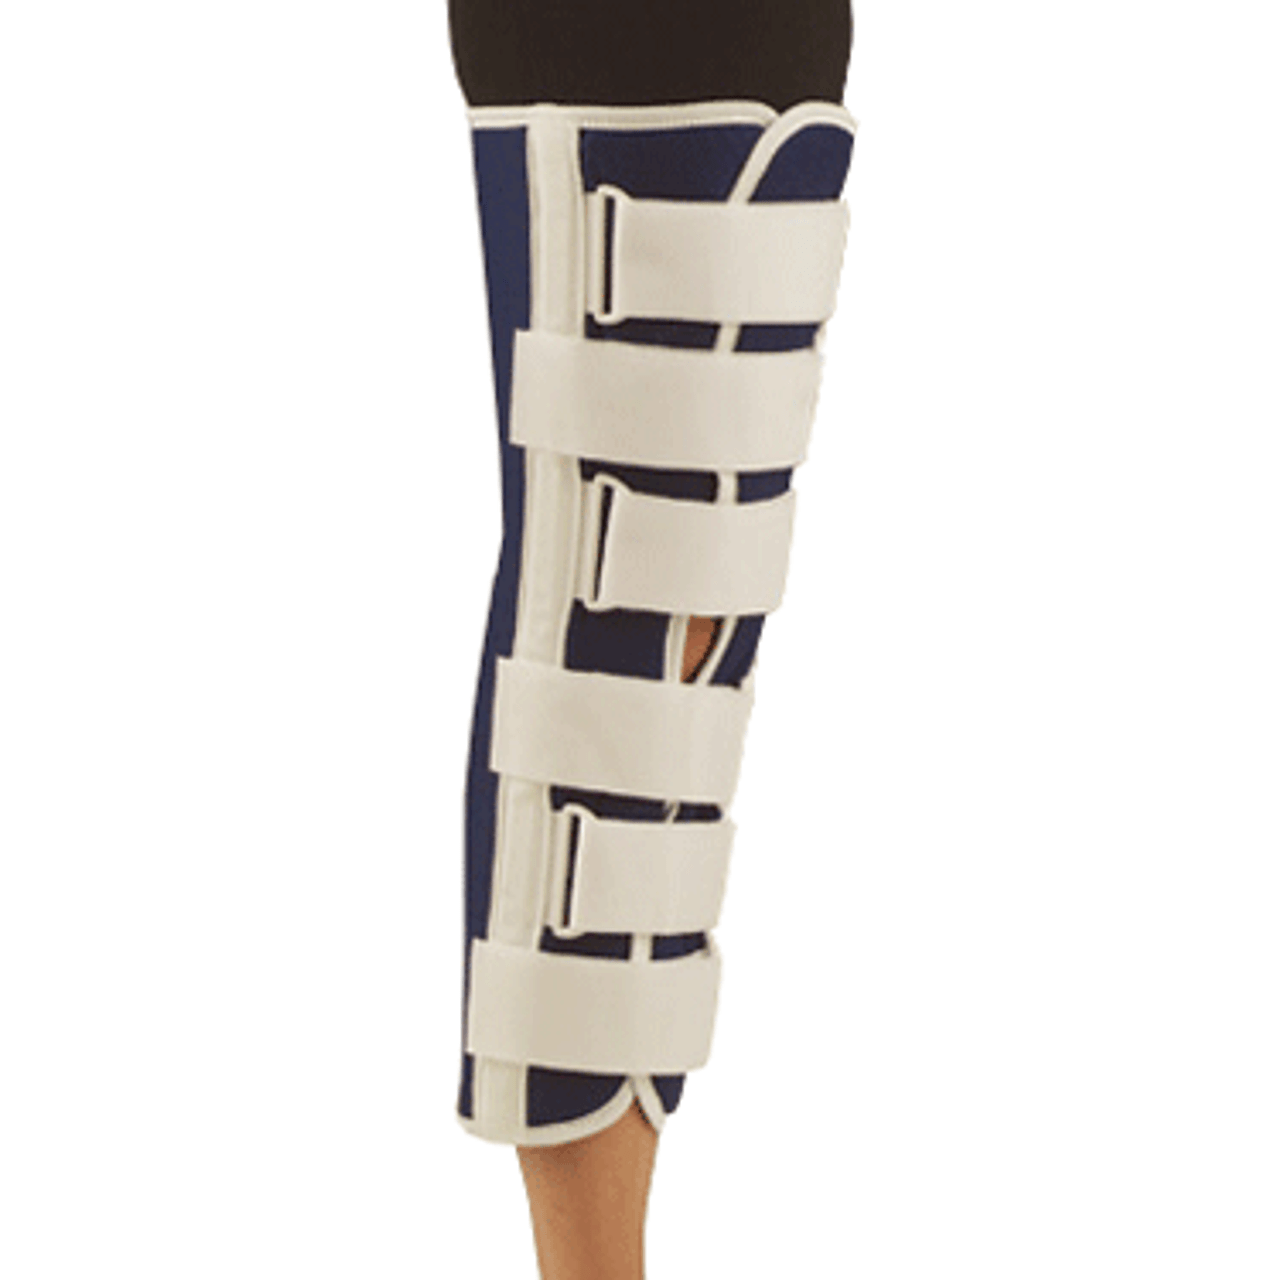 IMMOBILIZER KNEE BLUE CANVAS 22in SMALL 347-1010227